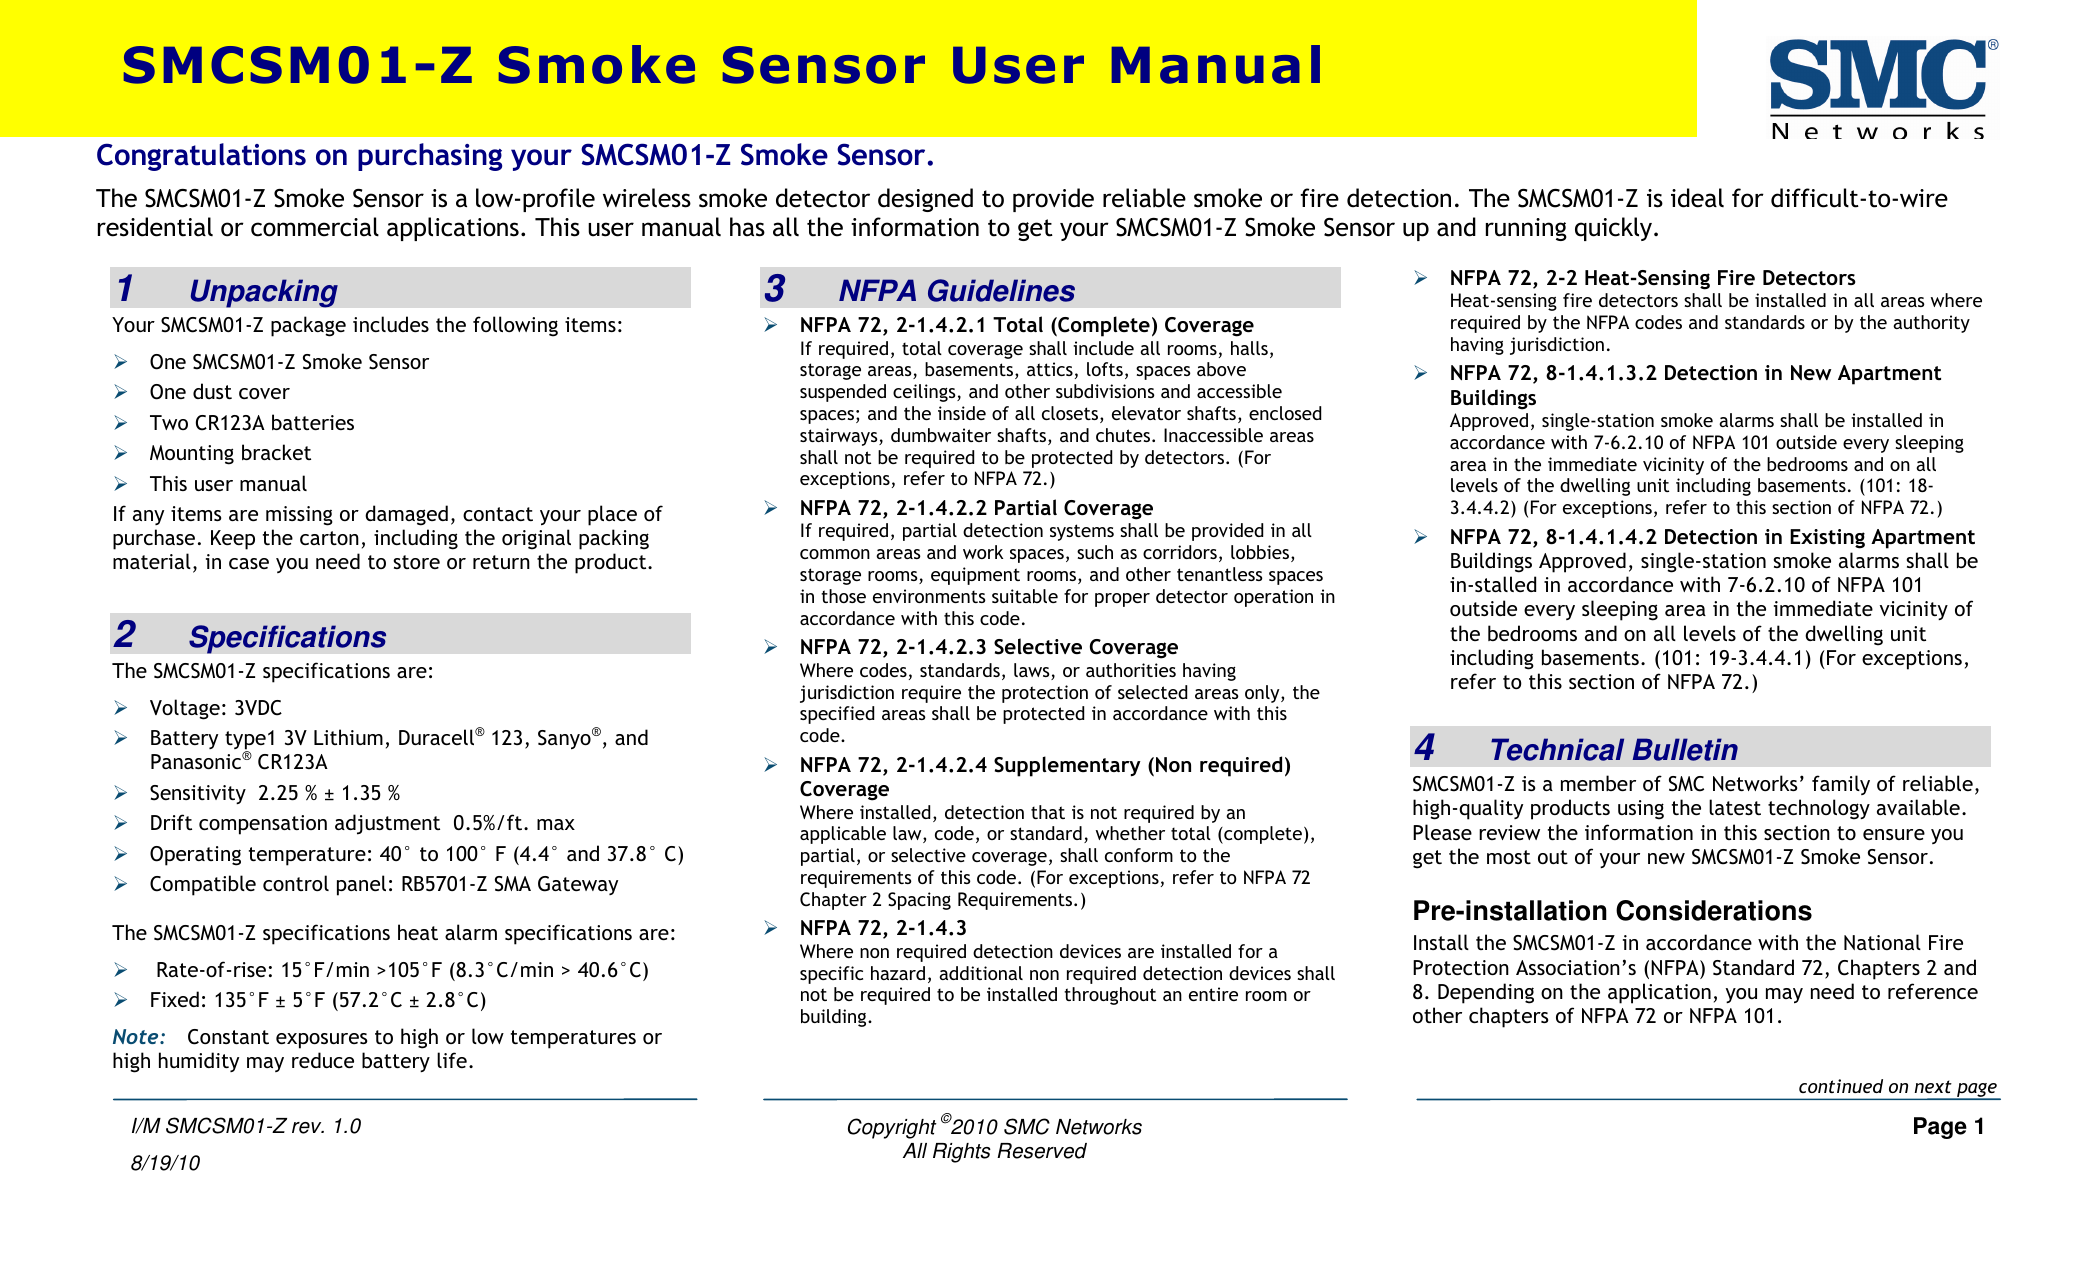    Copyright ©2010 SMC Networks     Page 1 All Rights Reserved  I/M SMCSM01-Z rev. 1.0 8/19/10 1   Unpacking Your SMCSM01-Z package includes the following items:  One SMCSM01-Z Smoke Sensor  One dust cover  Two CR123A batteries  Mounting bracket  This user manual If any items are missing or damaged, contact your place of purchase. Keep the carton, including the original packing material, in case you need to store or return the product.  2   Specifications The SMCSM01-Z specifications are:  Voltage: 3VDC   Battery type1 3V Lithium, Duracell® 123, Sanyo®, and Panasonic® CR123A  Sensitivity  2.25 % ± 1.35 %  Drift compensation adjustment  0.5%/ft. max  Operating temperature: 40° to 100° F (4.4° and 37.8° C)  Compatible control panel: RB5701-Z SMA Gateway The SMCSM01-Z specifications heat alarm specifications are:   Rate-of-rise: 15°F/min &gt;105°F (8.3°C/min &gt; 40.6°C)  Fixed: 135°F ± 5°F (57.2°C ± 2.8°C) Note: Constant exposures to high or low temperatures or high humidity may reduce battery life.  3   NFPA Guidelines  NFPA 72, 2-1.4.2.1 Total (Complete) Coverage If required, total coverage shall include all rooms, halls, storage areas, basements, attics, lofts, spaces above suspended ceilings, and other subdivisions and accessible spaces; and the inside of all closets, elevator shafts, enclosed stairways, dumbwaiter shafts, and chutes. Inaccessible areas shall not be required to be protected by detectors. (For exceptions, refer to NFPA 72.)  NFPA 72, 2-1.4.2.2 Partial Coverage If required, partial detection systems shall be provided in all common areas and work spaces, such as corridors, lobbies, storage rooms, equipment rooms, and other tenantless spaces in those environments suitable for proper detector operation in accordance with this code.  NFPA 72, 2-1.4.2.3 Selective Coverage Where codes, standards, laws, or authorities having jurisdiction require the protection of selected areas only, the specified areas shall be protected in accordance with this code.  NFPA 72, 2-1.4.2.4 Supplementary (Non required) Coverage Where installed, detection that is not required by an applicable law, code, or standard, whether total (complete), partial, or selective coverage, shall conform to the requirements of this code. (For exceptions, refer to NFPA 72 Chapter 2 Spacing Requirements.)  NFPA 72, 2-1.4.3 Where non required detection devices are installed for a specific hazard, additional non required detection devices shall not be required to be installed throughout an entire room or building.  NFPA 72, 2-2 Heat-Sensing Fire Detectors Heat-sensing fire detectors shall be installed in all areas where required by the NFPA codes and standards or by the authority having jurisdiction.  NFPA 72, 8-1.4.1.3.2 Detection in New Apartment Buildings Approved, single-station smoke alarms shall be installed in accordance with 7-6.2.10 of NFPA 101 outside every sleeping area in the immediate vicinity of the bedrooms and on all levels of the dwelling unit including basements. (101: 18-3.4.4.2) (For exceptions, refer to this section of NFPA 72.)  NFPA 72, 8-1.4.1.4.2 Detection in Existing Apartment Buildings Approved, single-station smoke alarms shall be in-stalled in accordance with 7-6.2.10 of NFPA 101 outside every sleeping area in the immediate vicinity of the bedrooms and on all levels of the dwelling unit including basements. (101: 19-3.4.4.1) (For exceptions, refer to this section of NFPA 72.)  4   Technical Bulletin SMCSM01-Z is a member of SMC Networks’ family of reliable, high-quality products using the latest technology available. Please review the information in this section to ensure you get the most out of your new SMCSM01-Z Smoke Sensor. Pre-installation Considerations Install the SMCSM01-Z in accordance with the National Fire Protection Association’s (NFPA) Standard 72, Chapters 2 and 8. Depending on the application, you may need to reference other chapters of NFPA 72 or NFPA 101. SMCSM01-Z Smoke Sensor User Manual Congratulations on purchasing your SMCSM01-Z Smoke Sensor. The SMCSM01-Z Smoke Sensor is a low-profile wireless smoke detector designed to provide reliable smoke or fire detection. The SMCSM01-Z is ideal for difficult-to-wire residential or commercial applications. This user manual has all the information to get your SMCSM01-Z Smoke Sensor up and running quickly.   continued on next page 